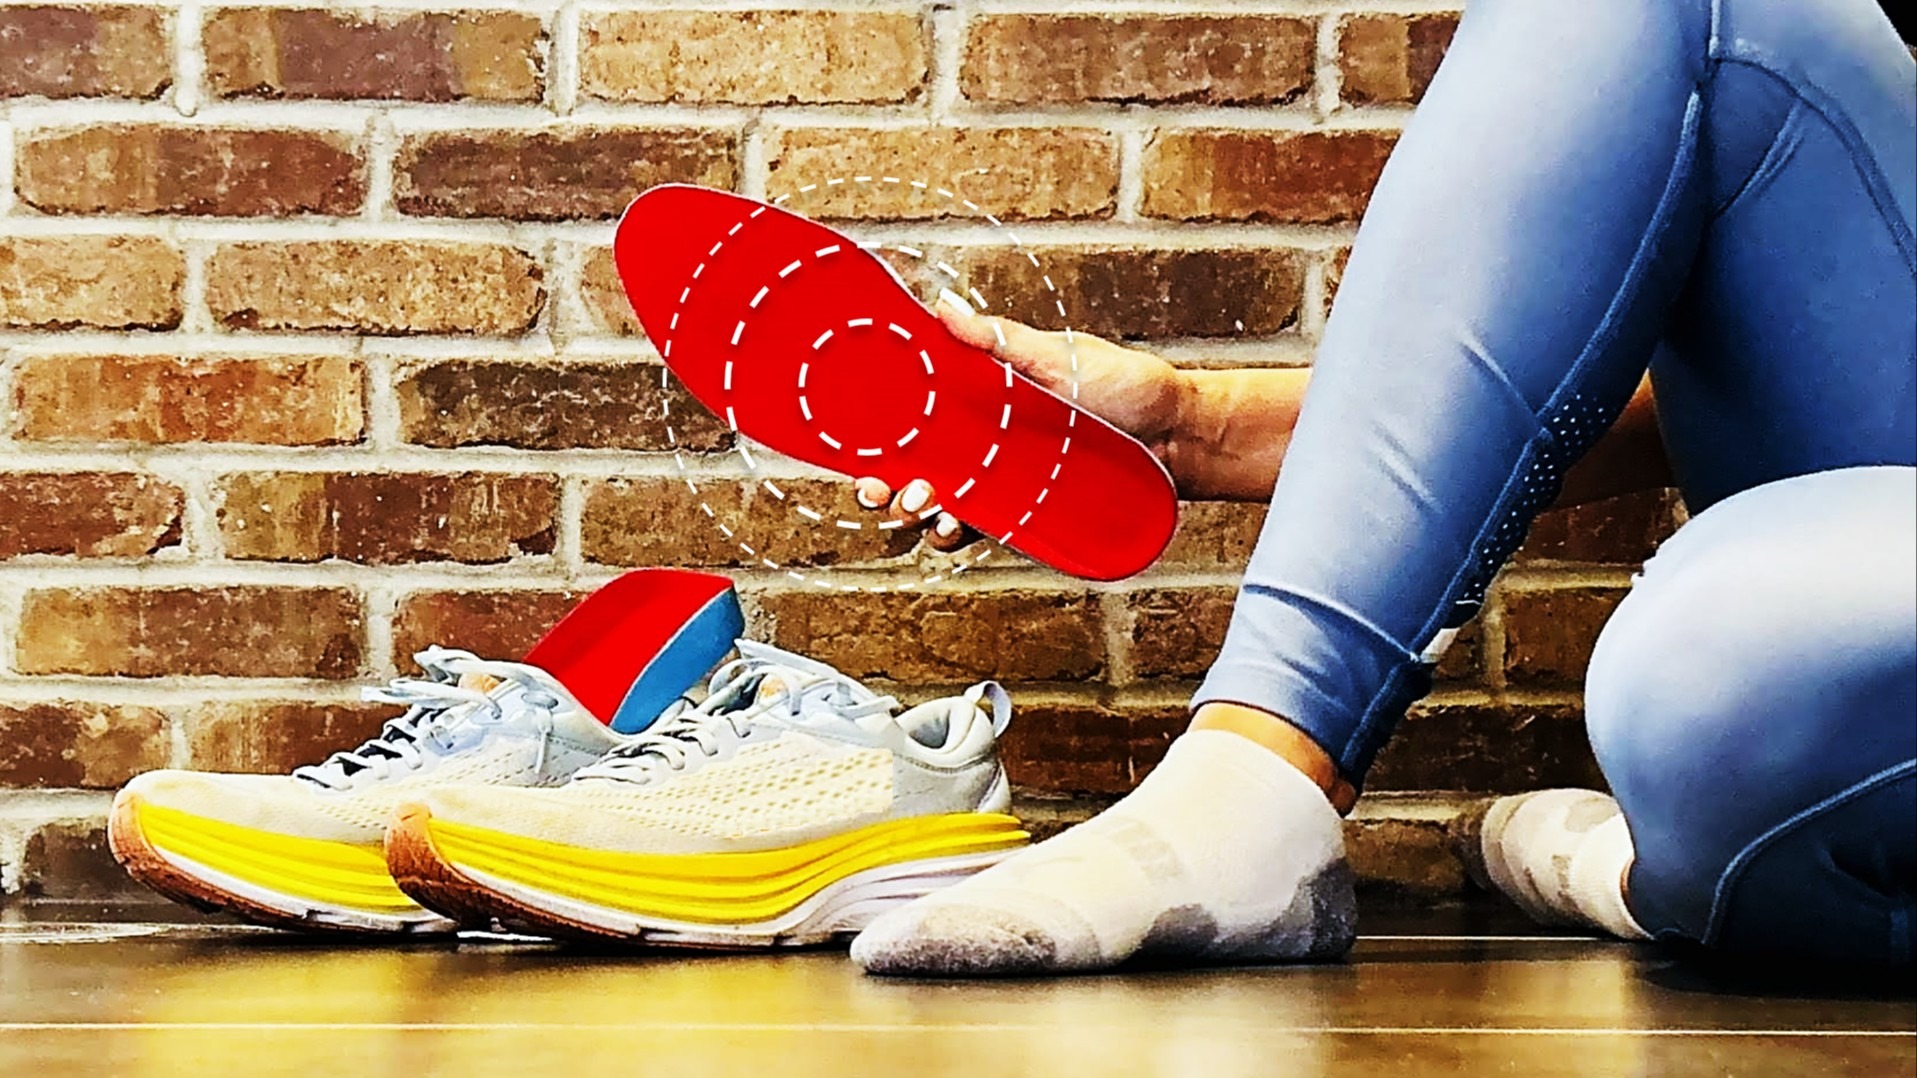 This Self-Powered Smart Shoe Insole Tracks Vital Signs & Health of Wearers